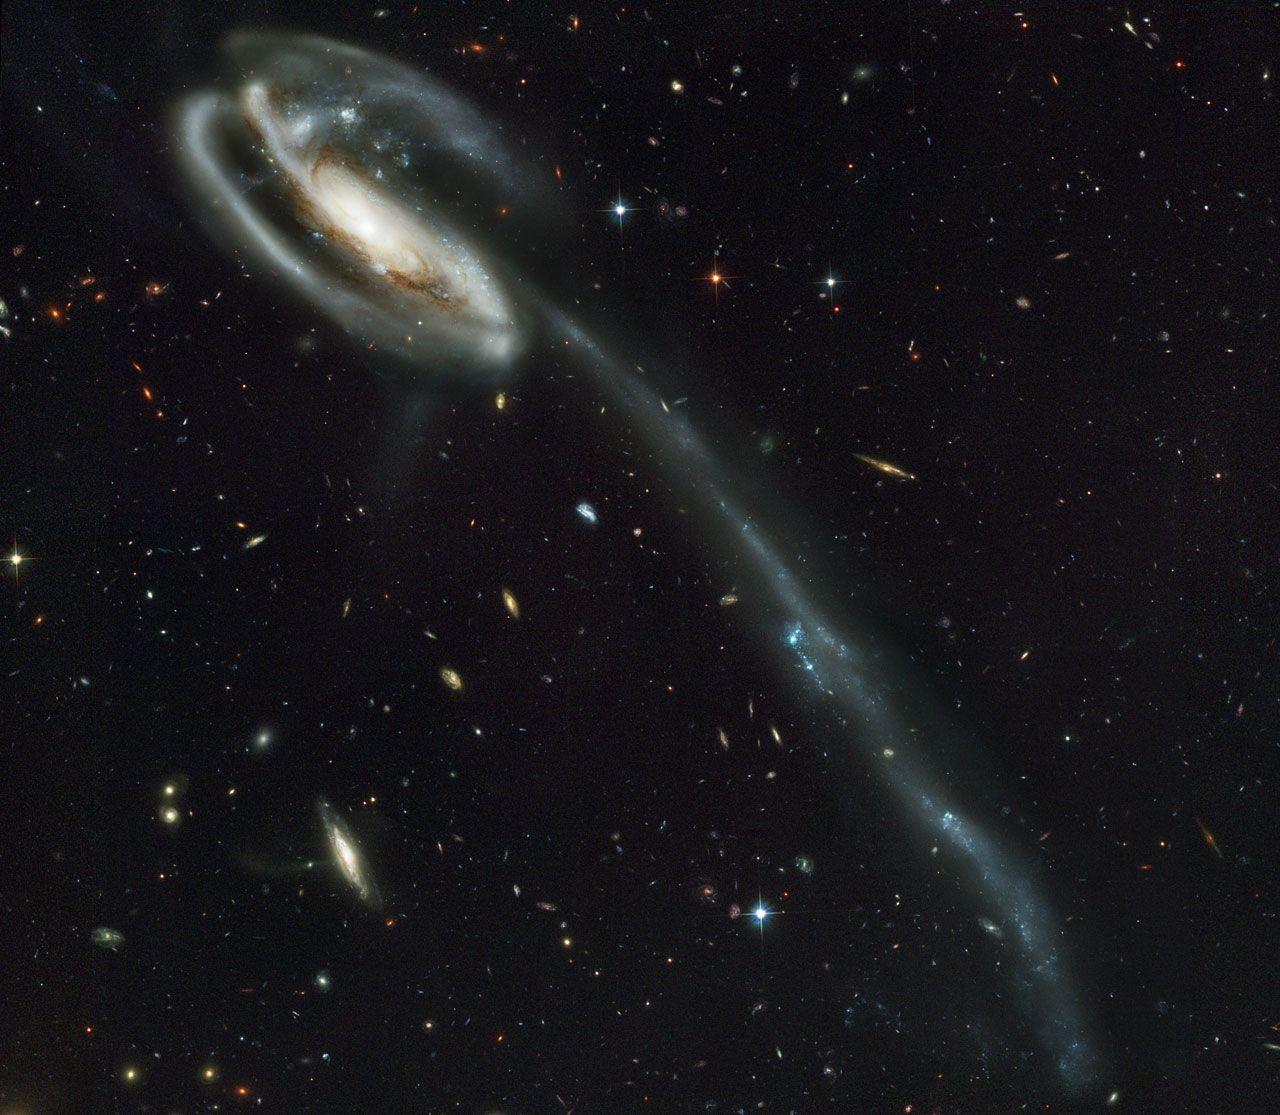 A 'wallpaper' of distant galaxies is a stunning backdrop